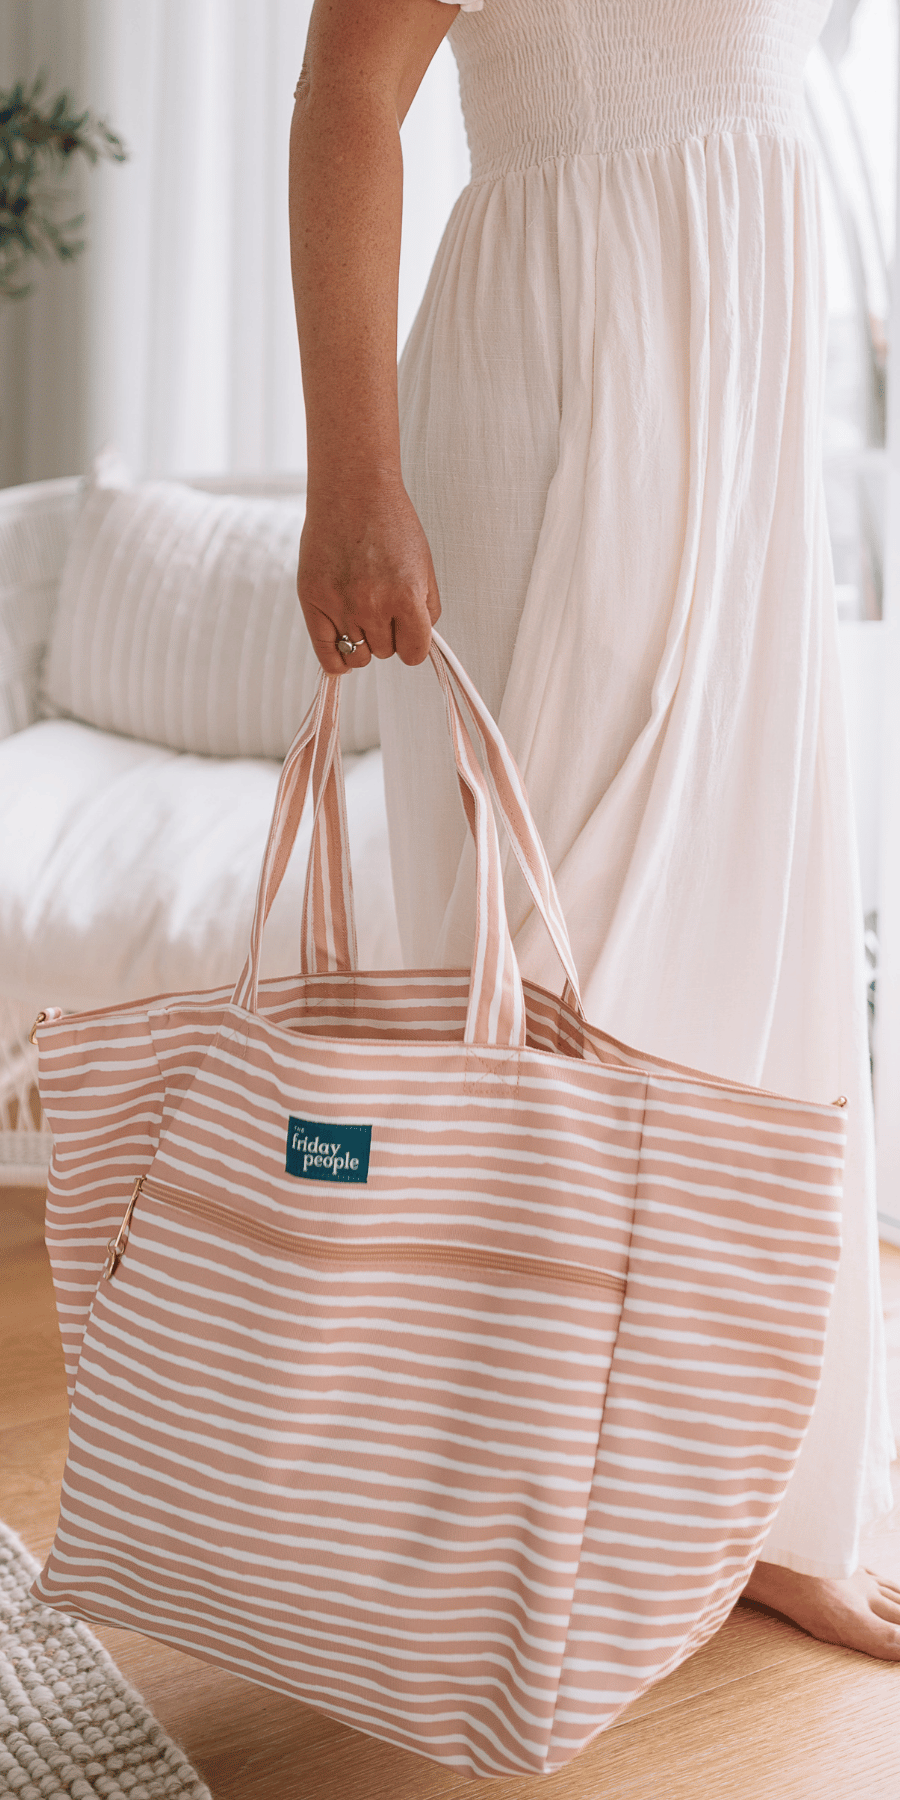 Friday Favorites - The Tote Bag That Changed My Life